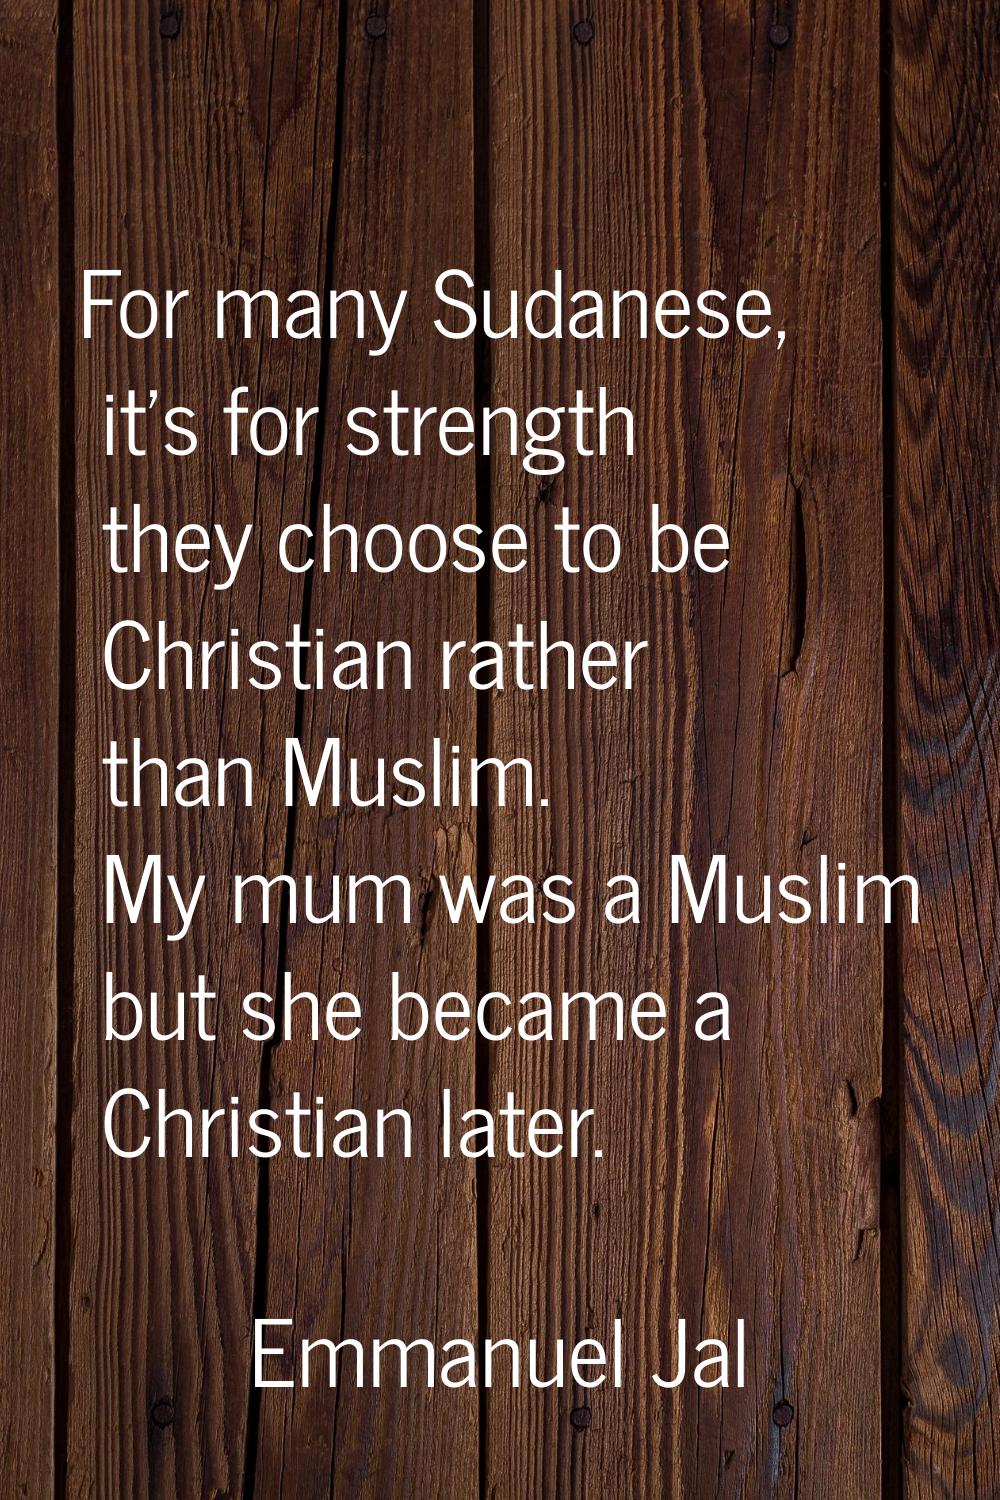 For many Sudanese, it's for strength they choose to be Christian rather than Muslim. My mum was a M